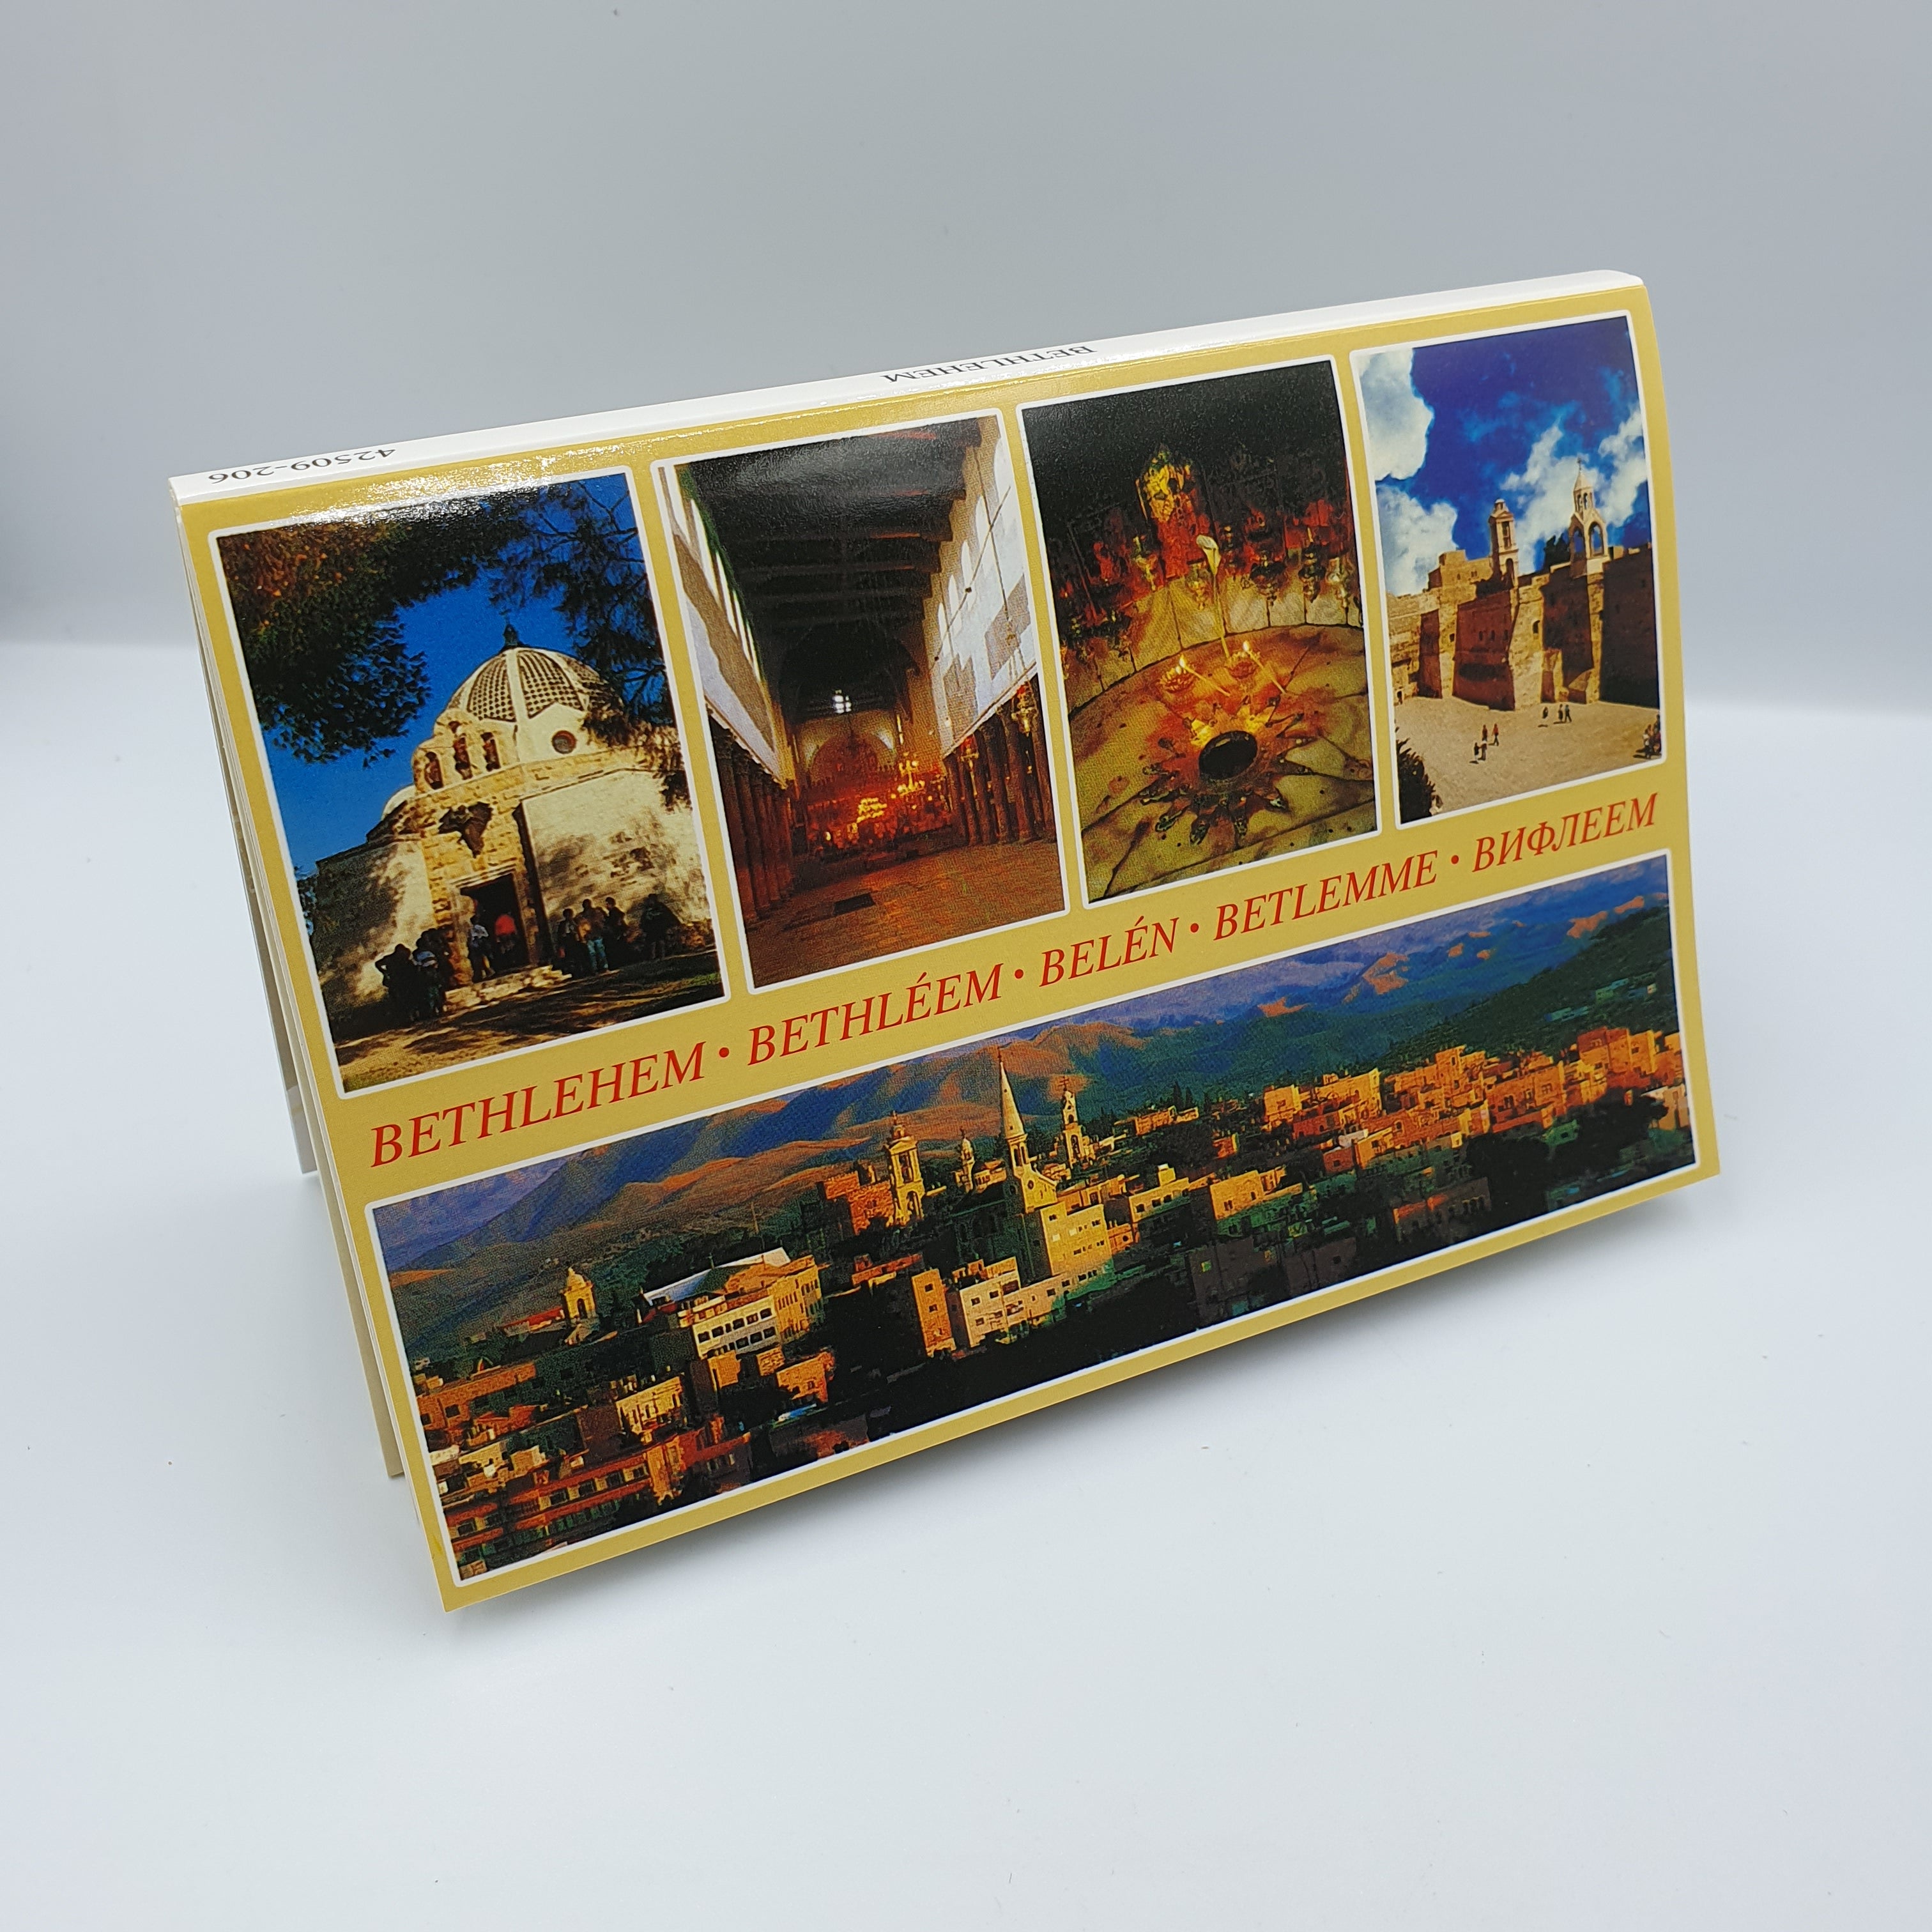 Holy Land Pictures & Sites in Bethlehem - 10 PostCards in 1 HLG212 - with Zuluf Certificate